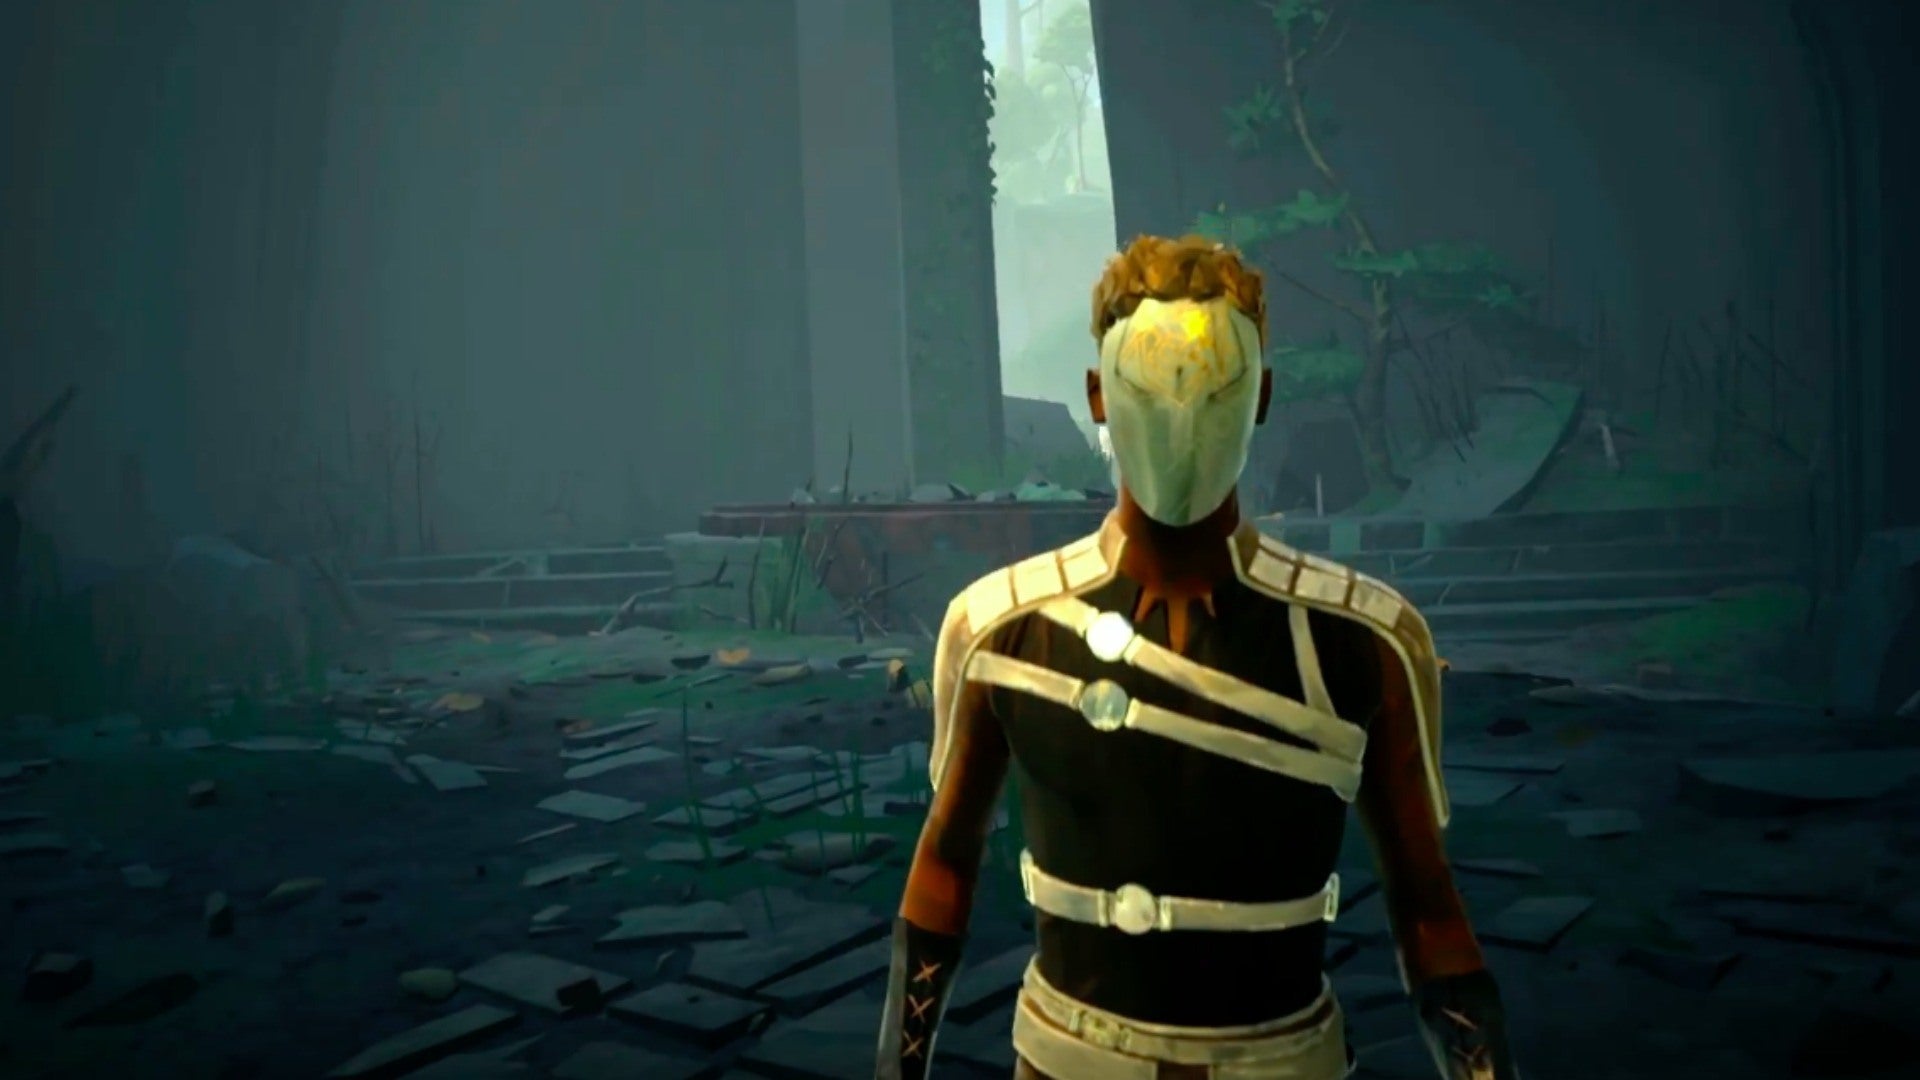 Absolver Wallpapers